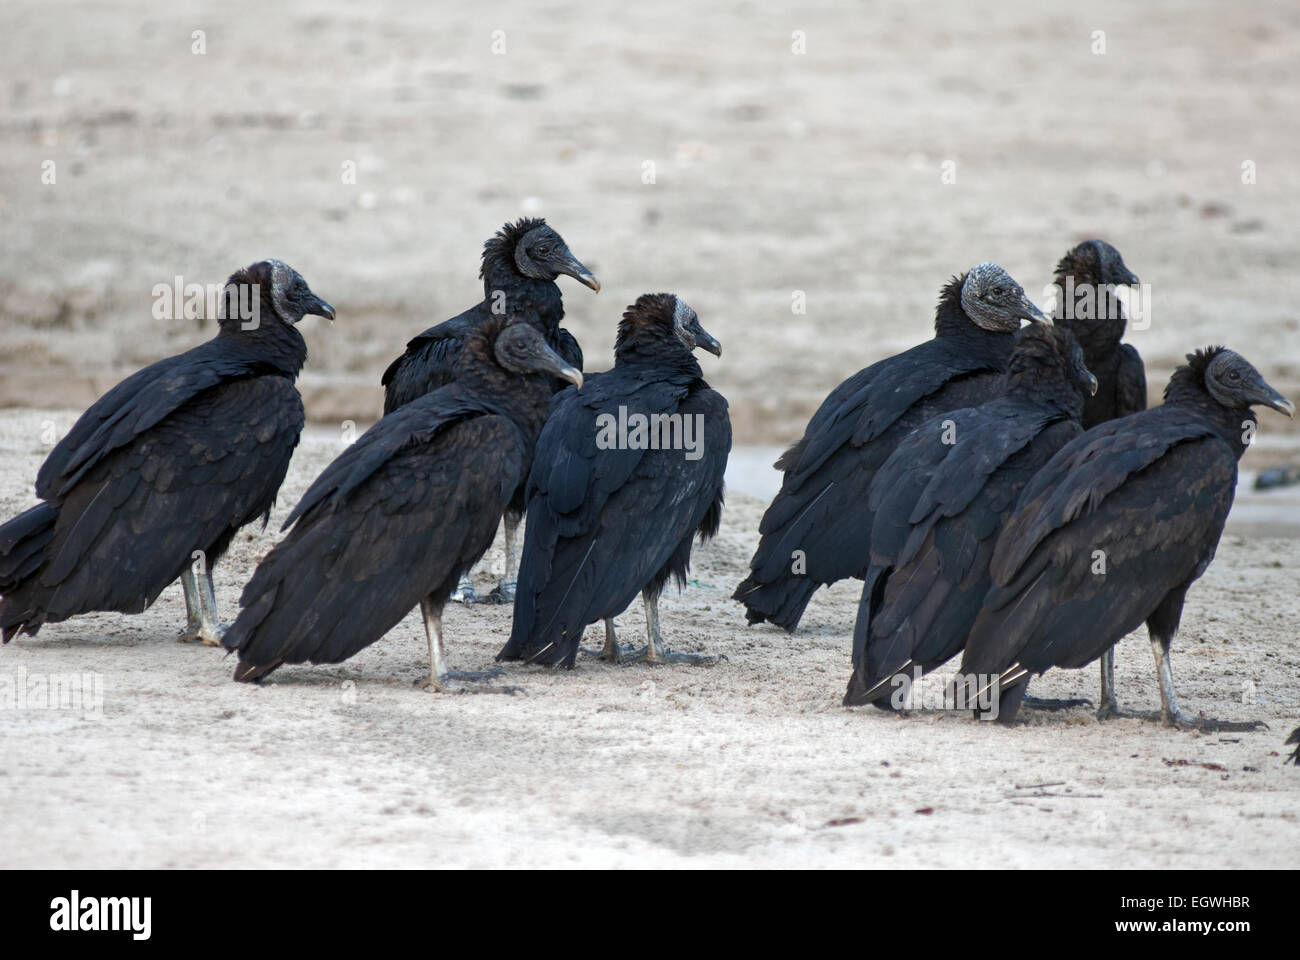 A group of black vultures standing on the beach. Black vultures, Coragyps atratus, also known as the American black vulture. Stock Photo